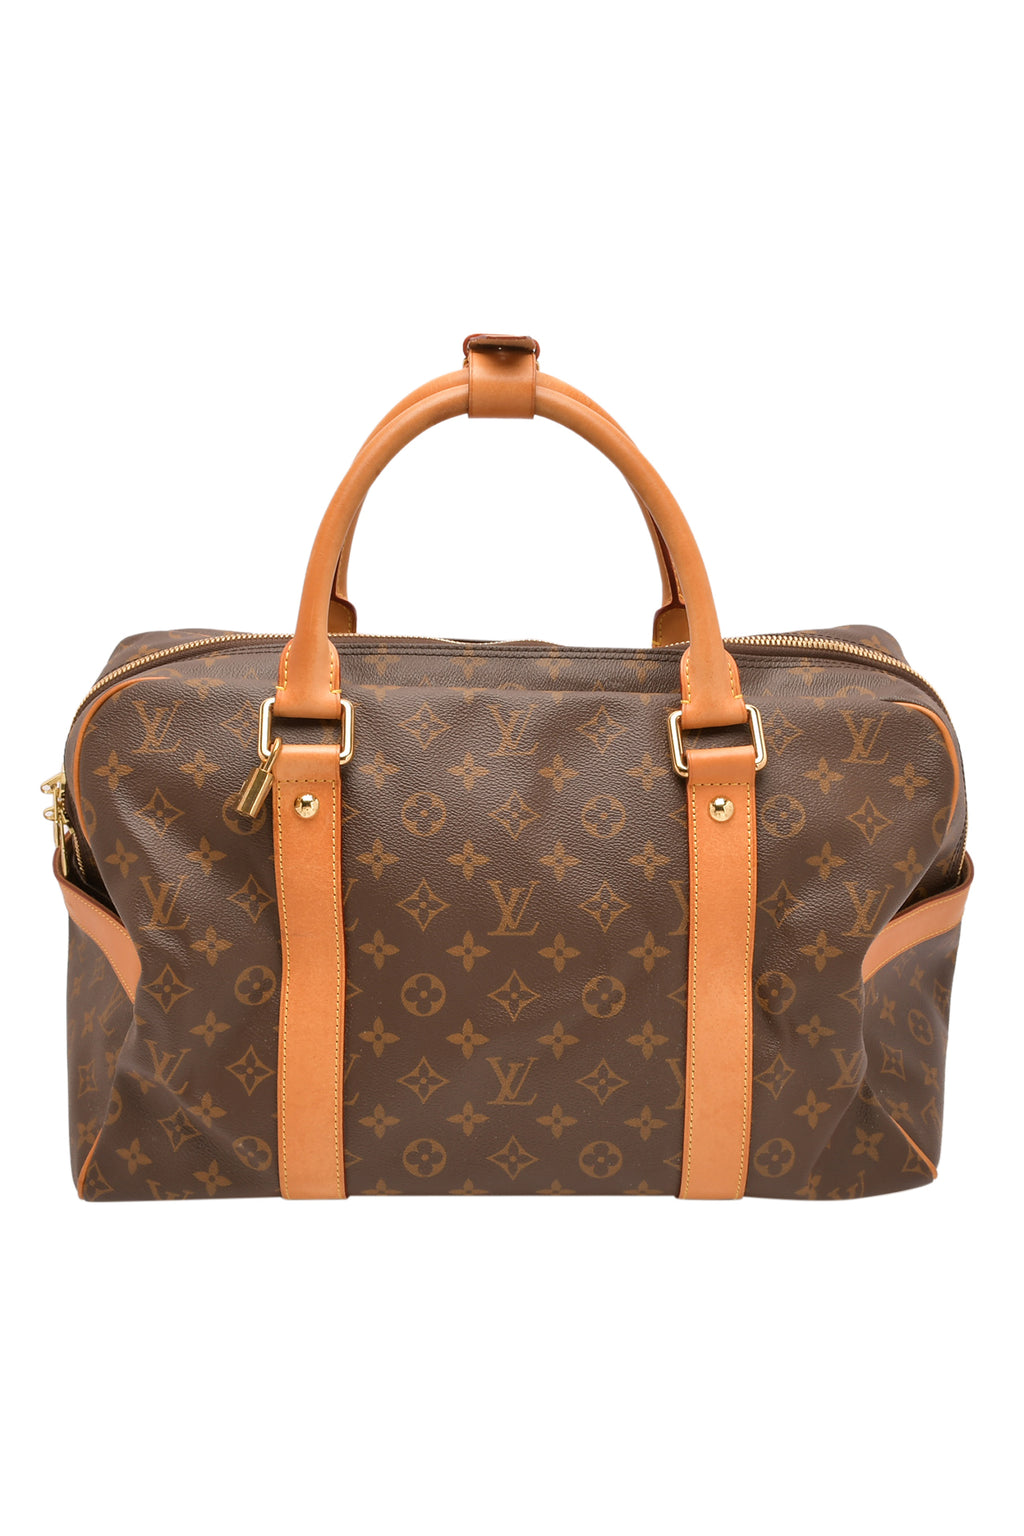 louis vuitton carry all